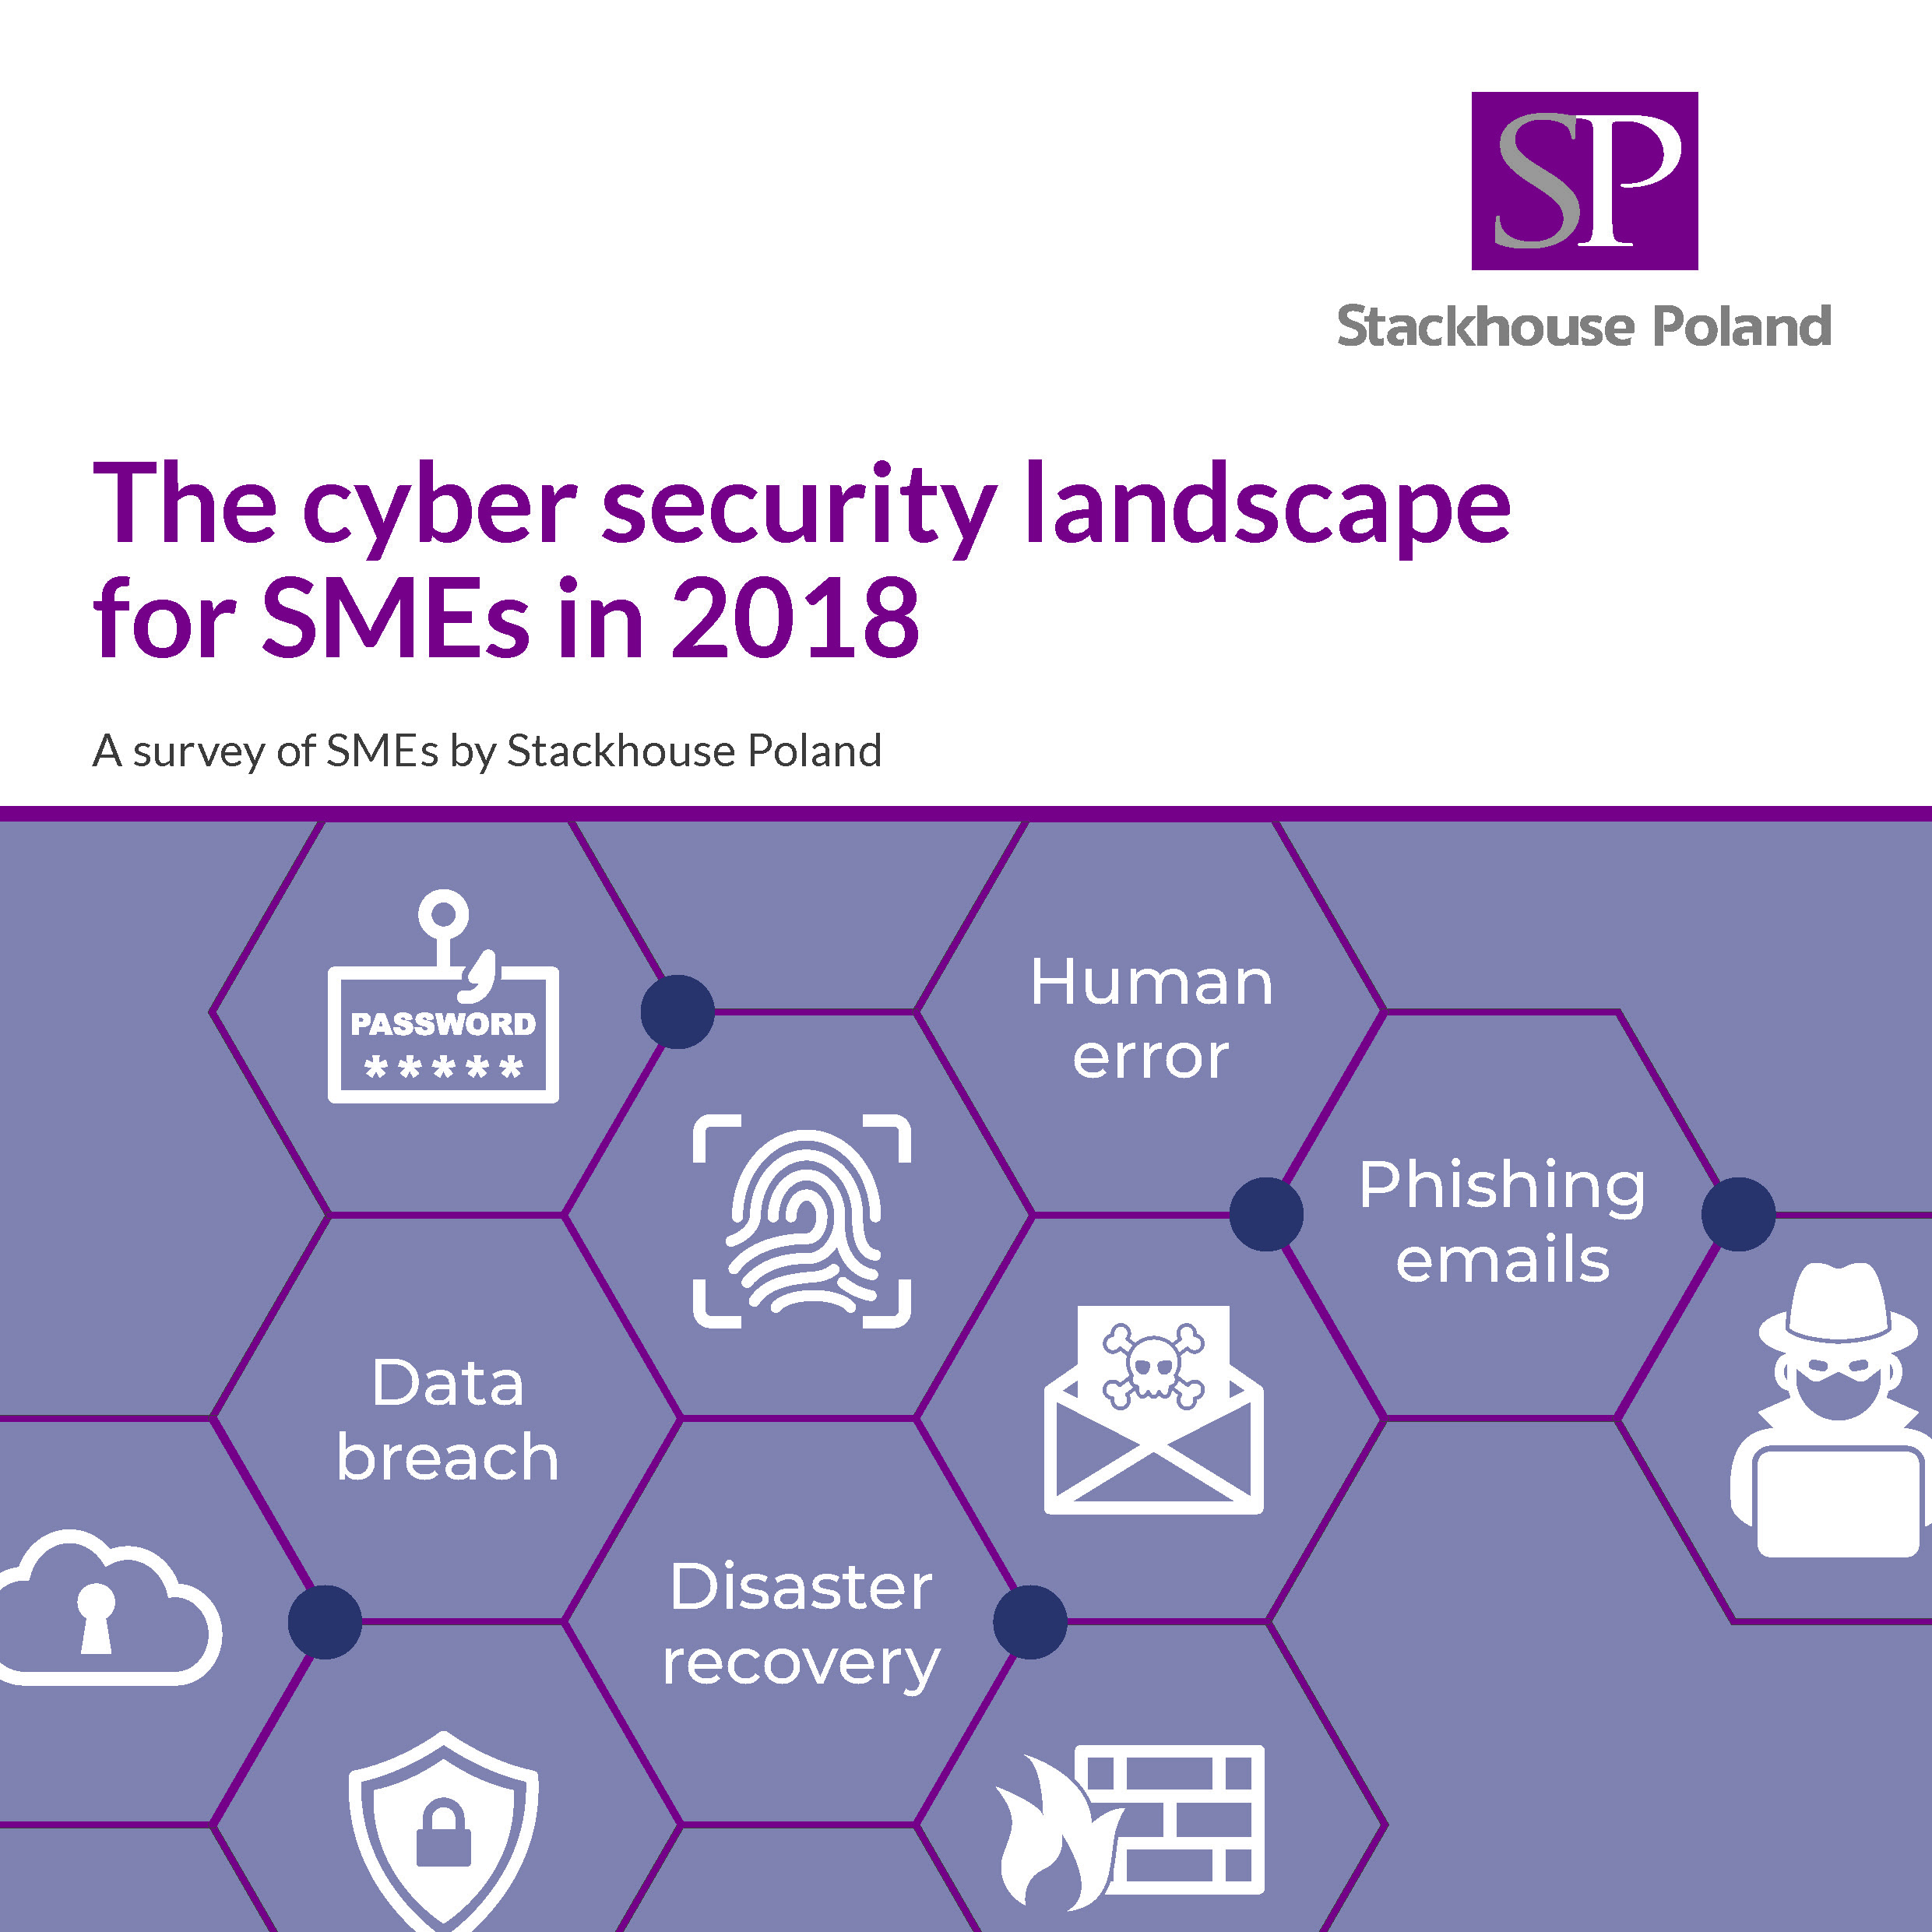 Stackhouse Poland publish a report on the Cyber Security landscape for SMEs in the UK today